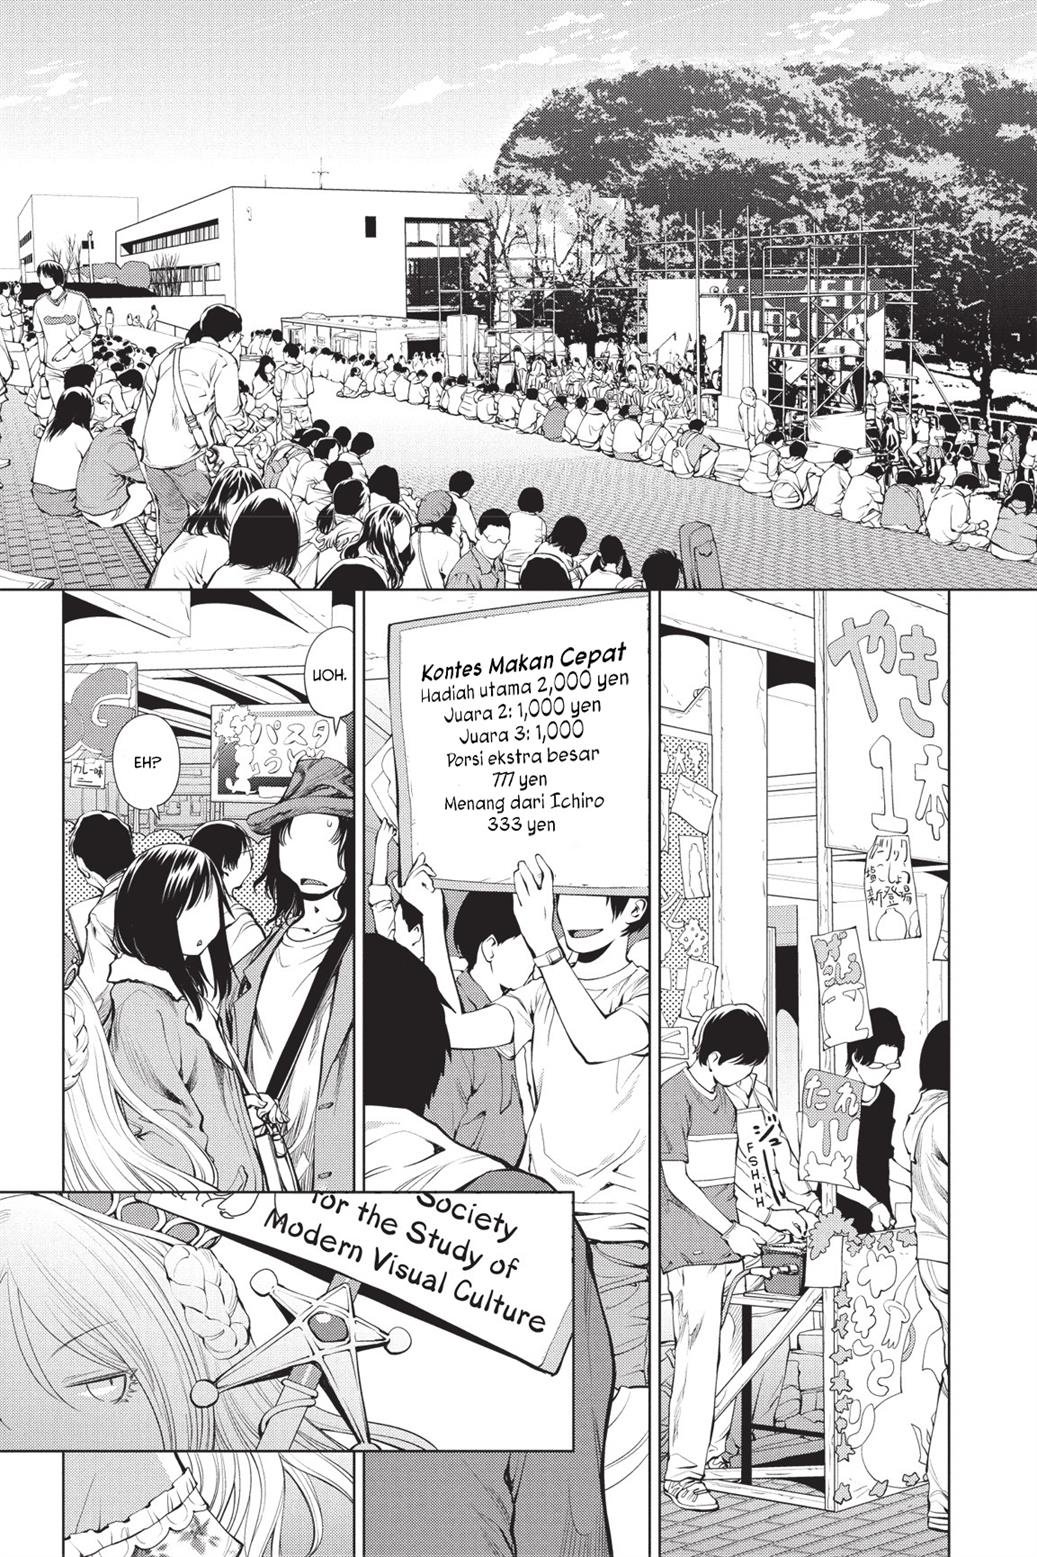 Genshiken – The Society for the Study of Modern Visual Culture Chapter 75 Image 0